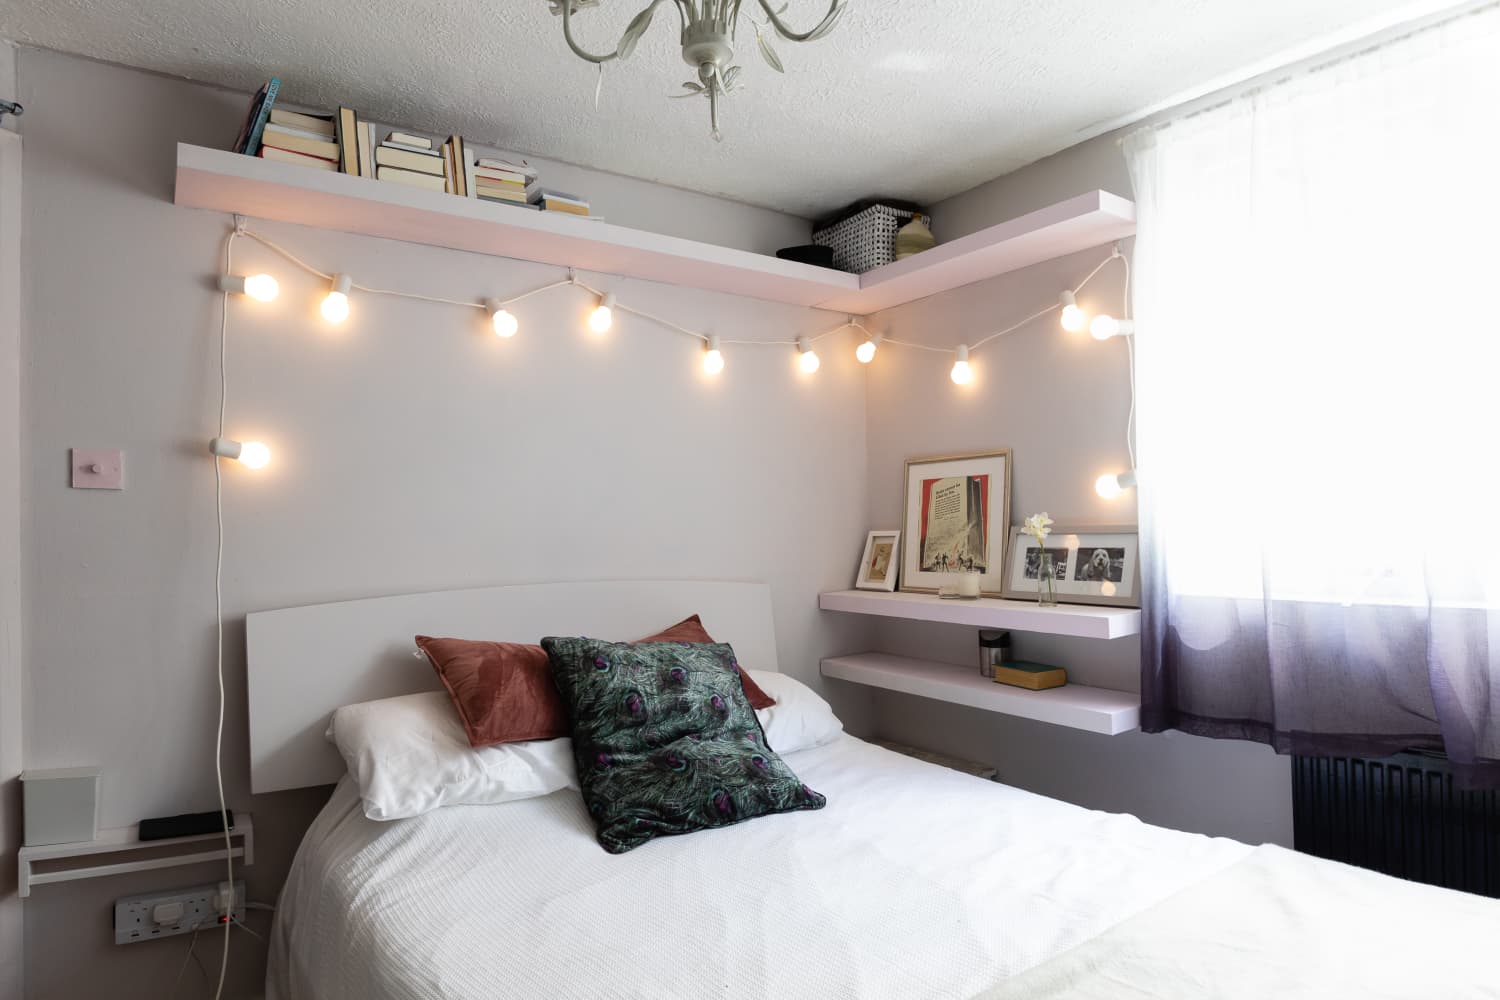 How to Hang Lights in the Bedroom - String Lights, Pendants, Sconces